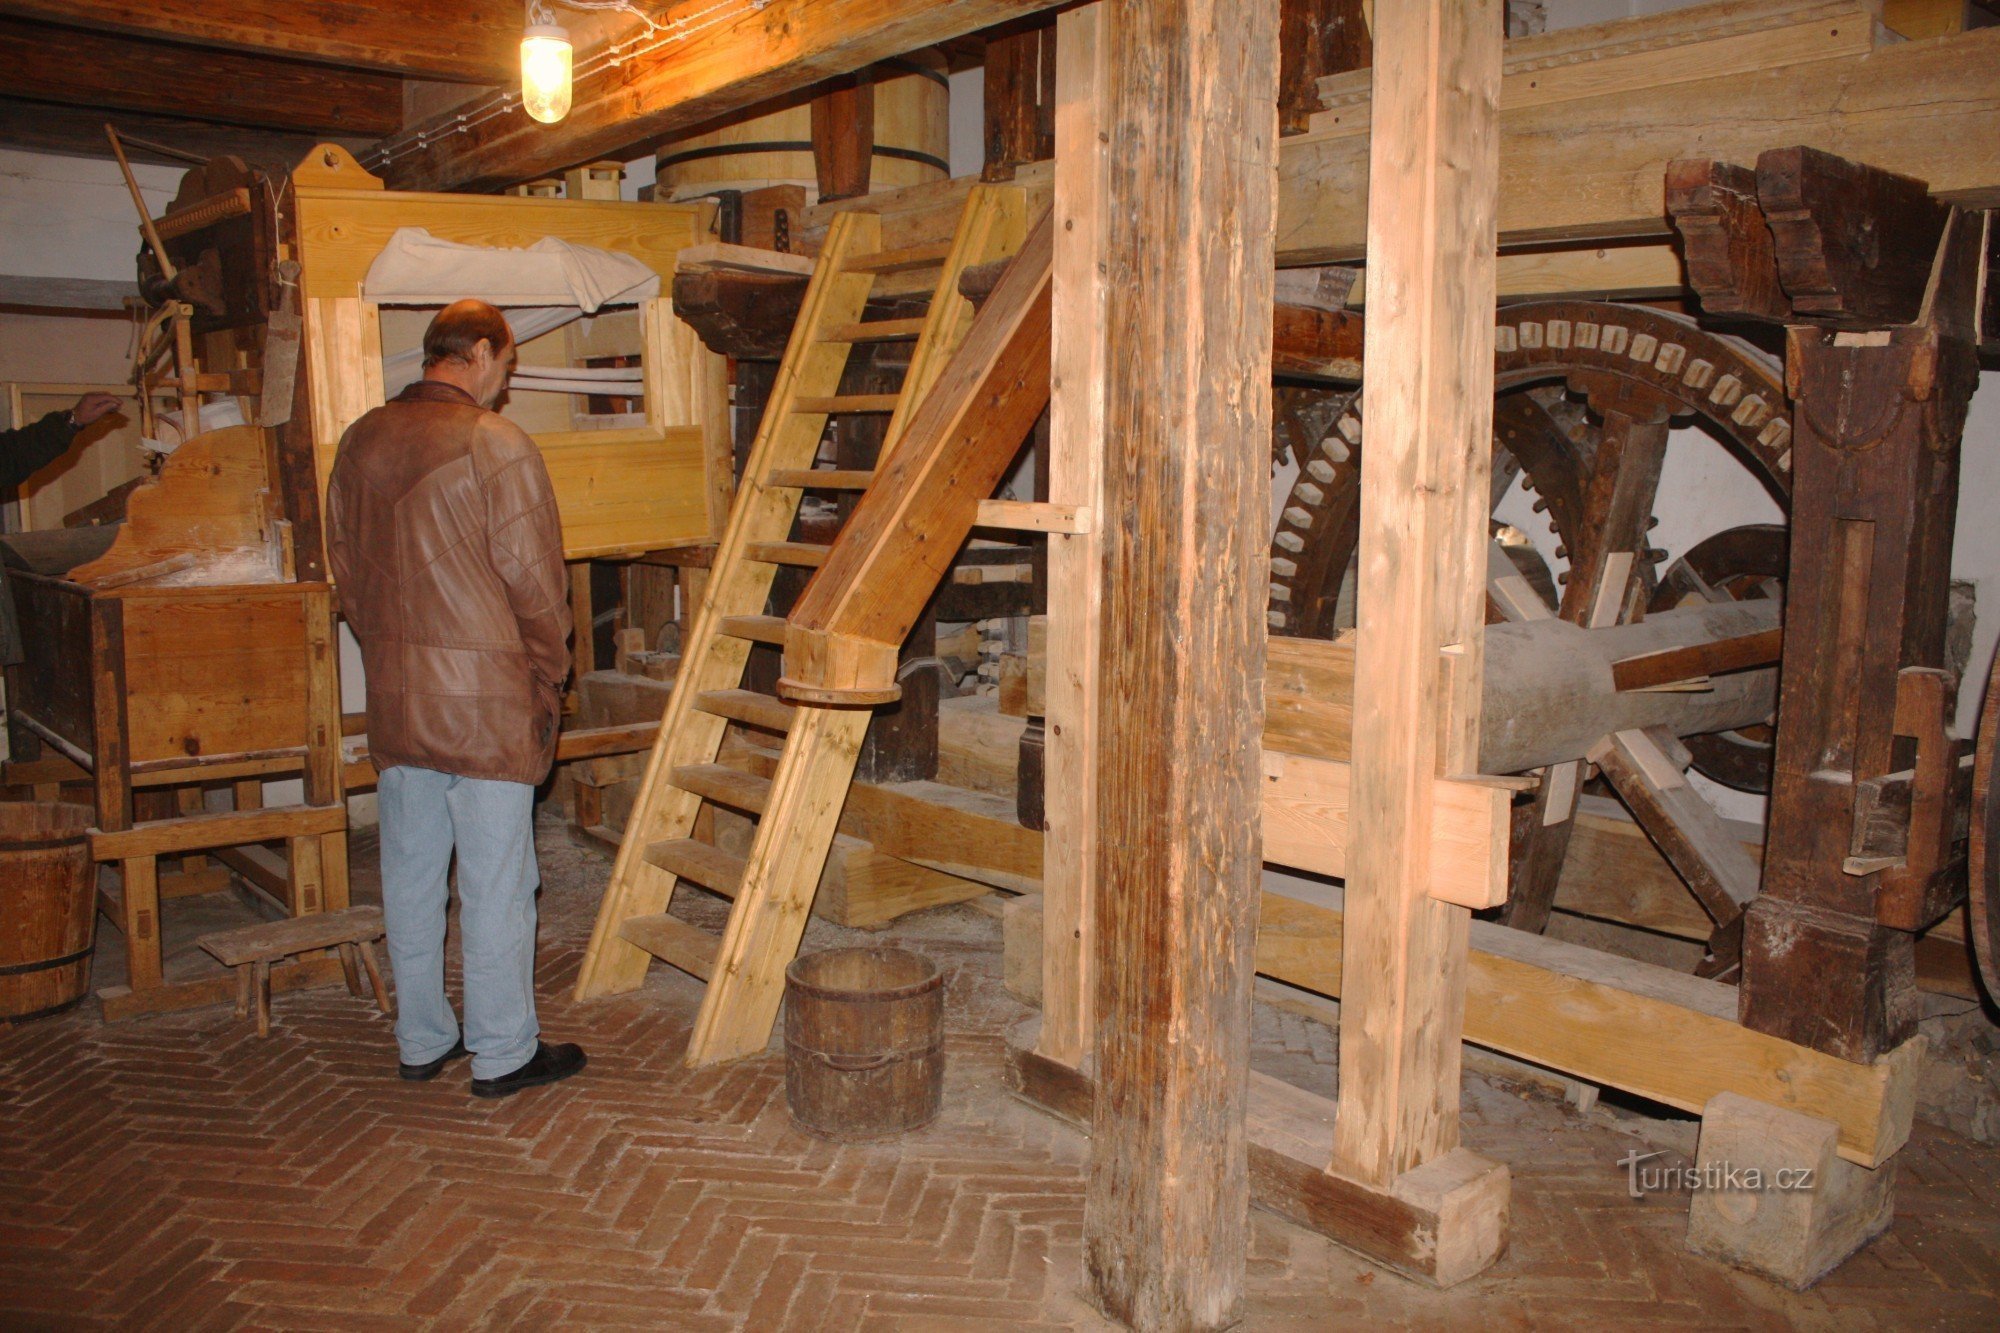 Milling exhibition on the ground floor